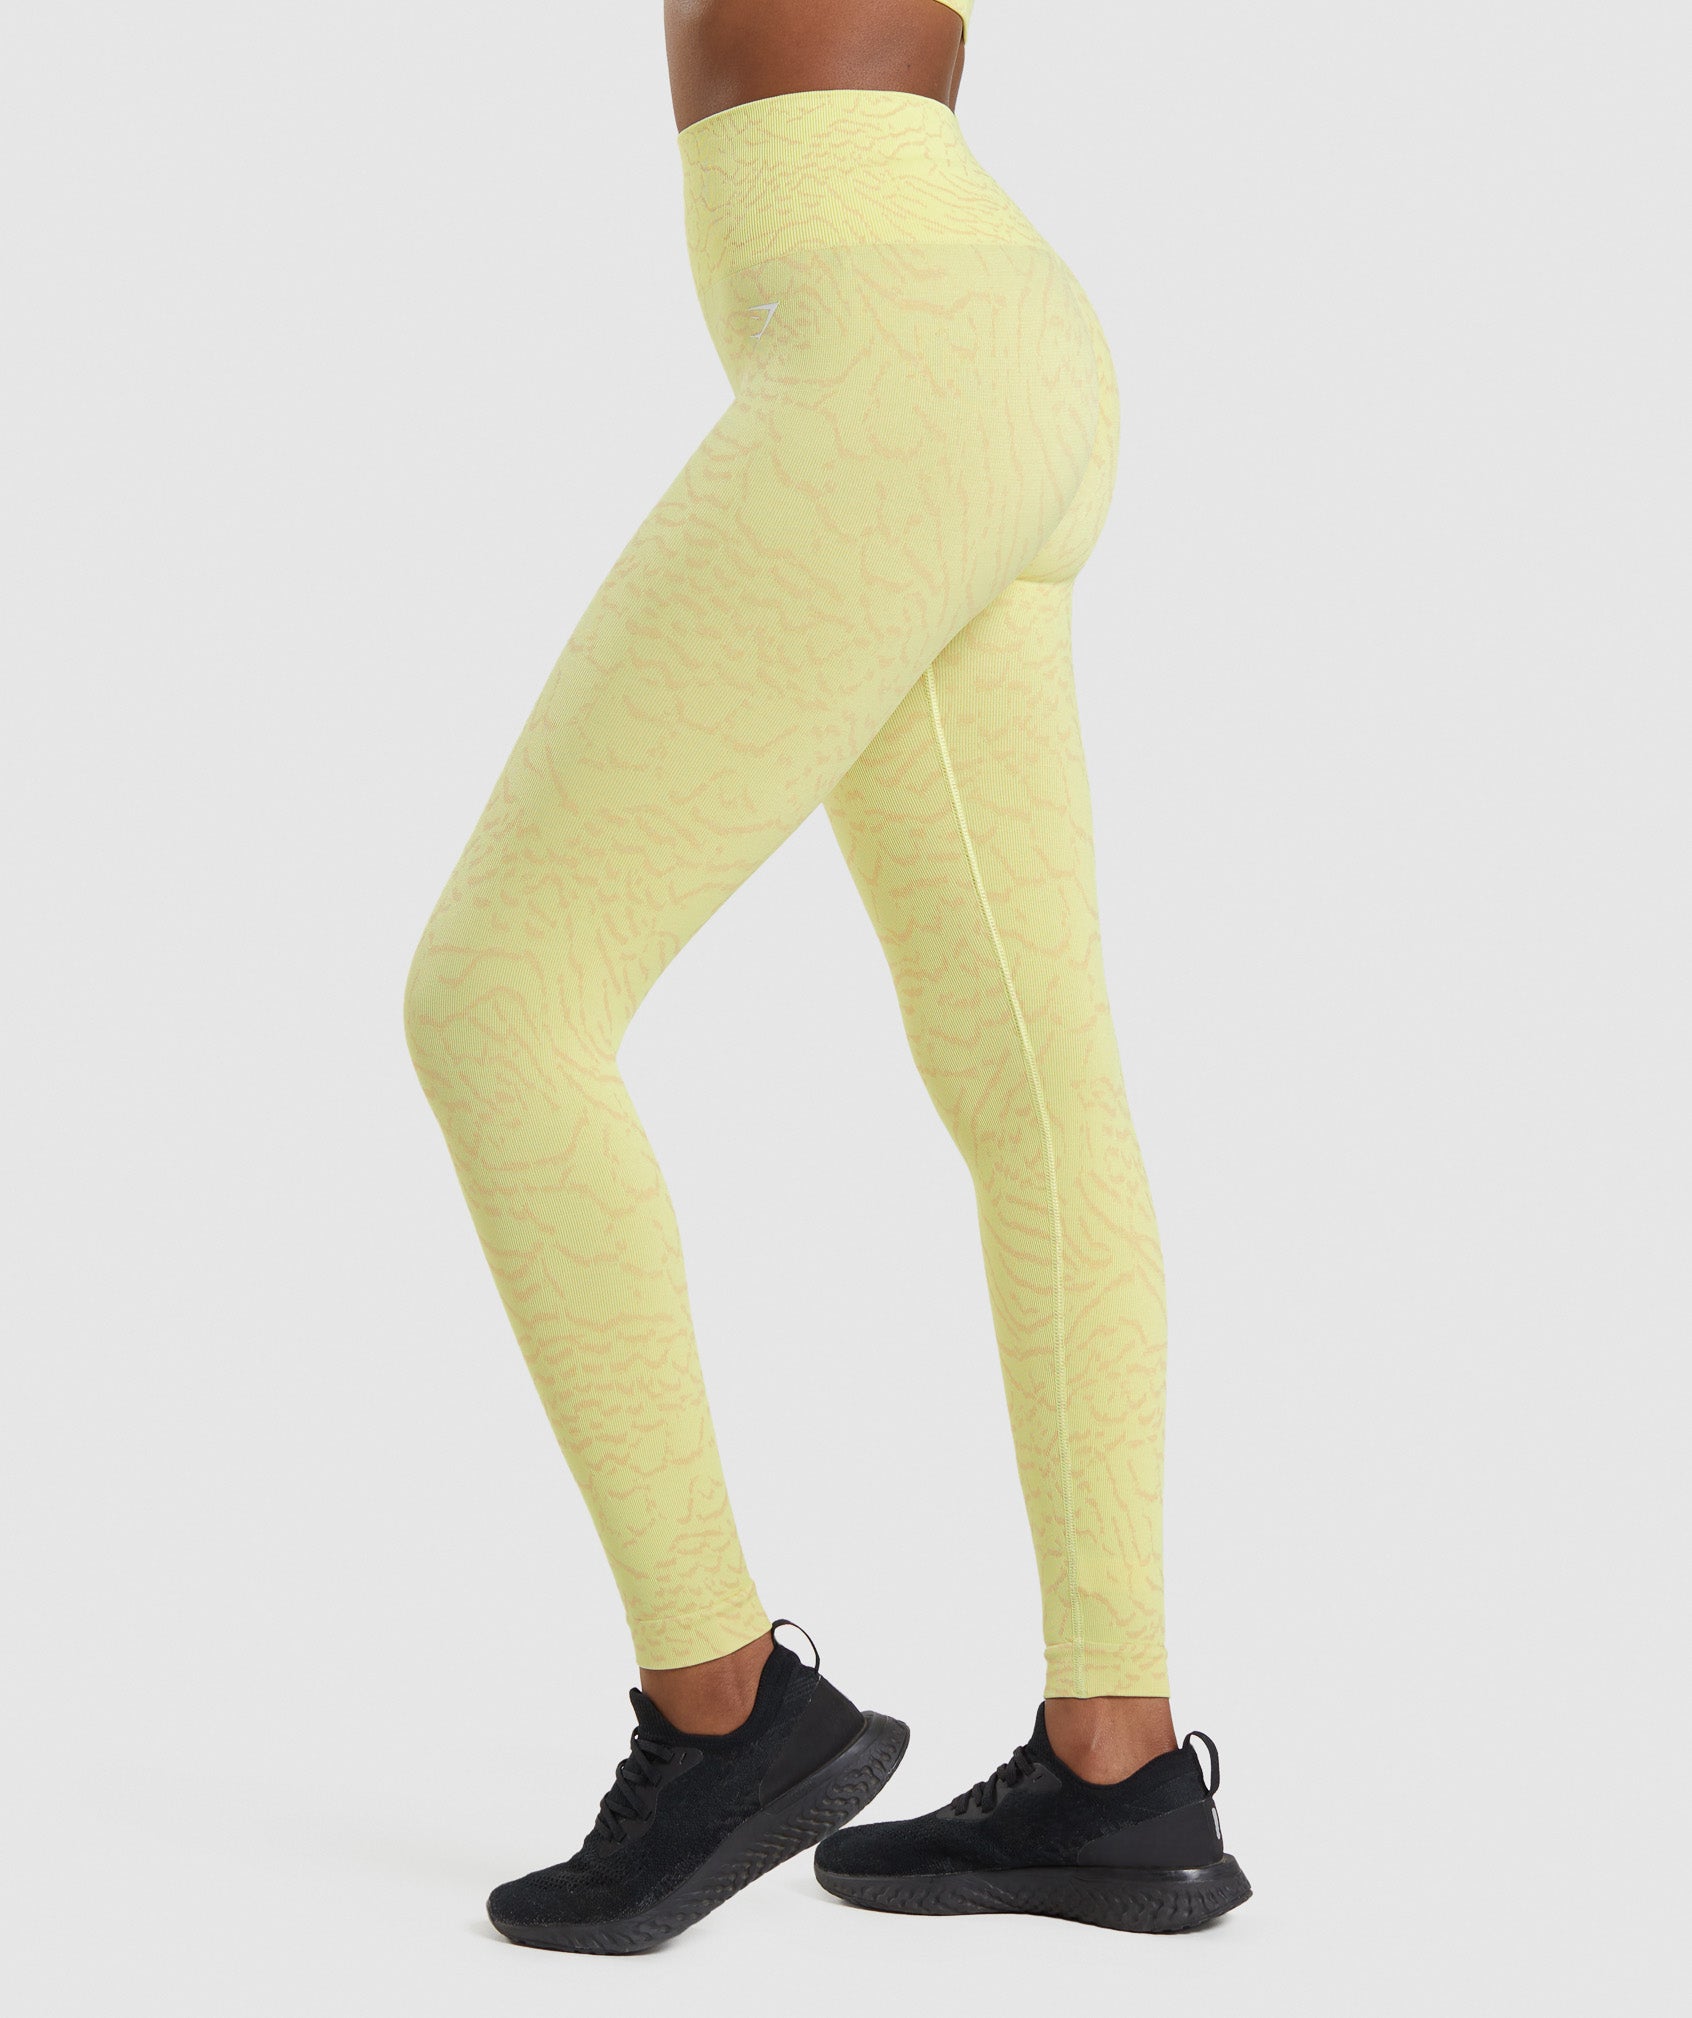 Yellow Crop Legging from So Low @ Apparel Addiction - SoLow 3/4 Leggings –  ShopAA